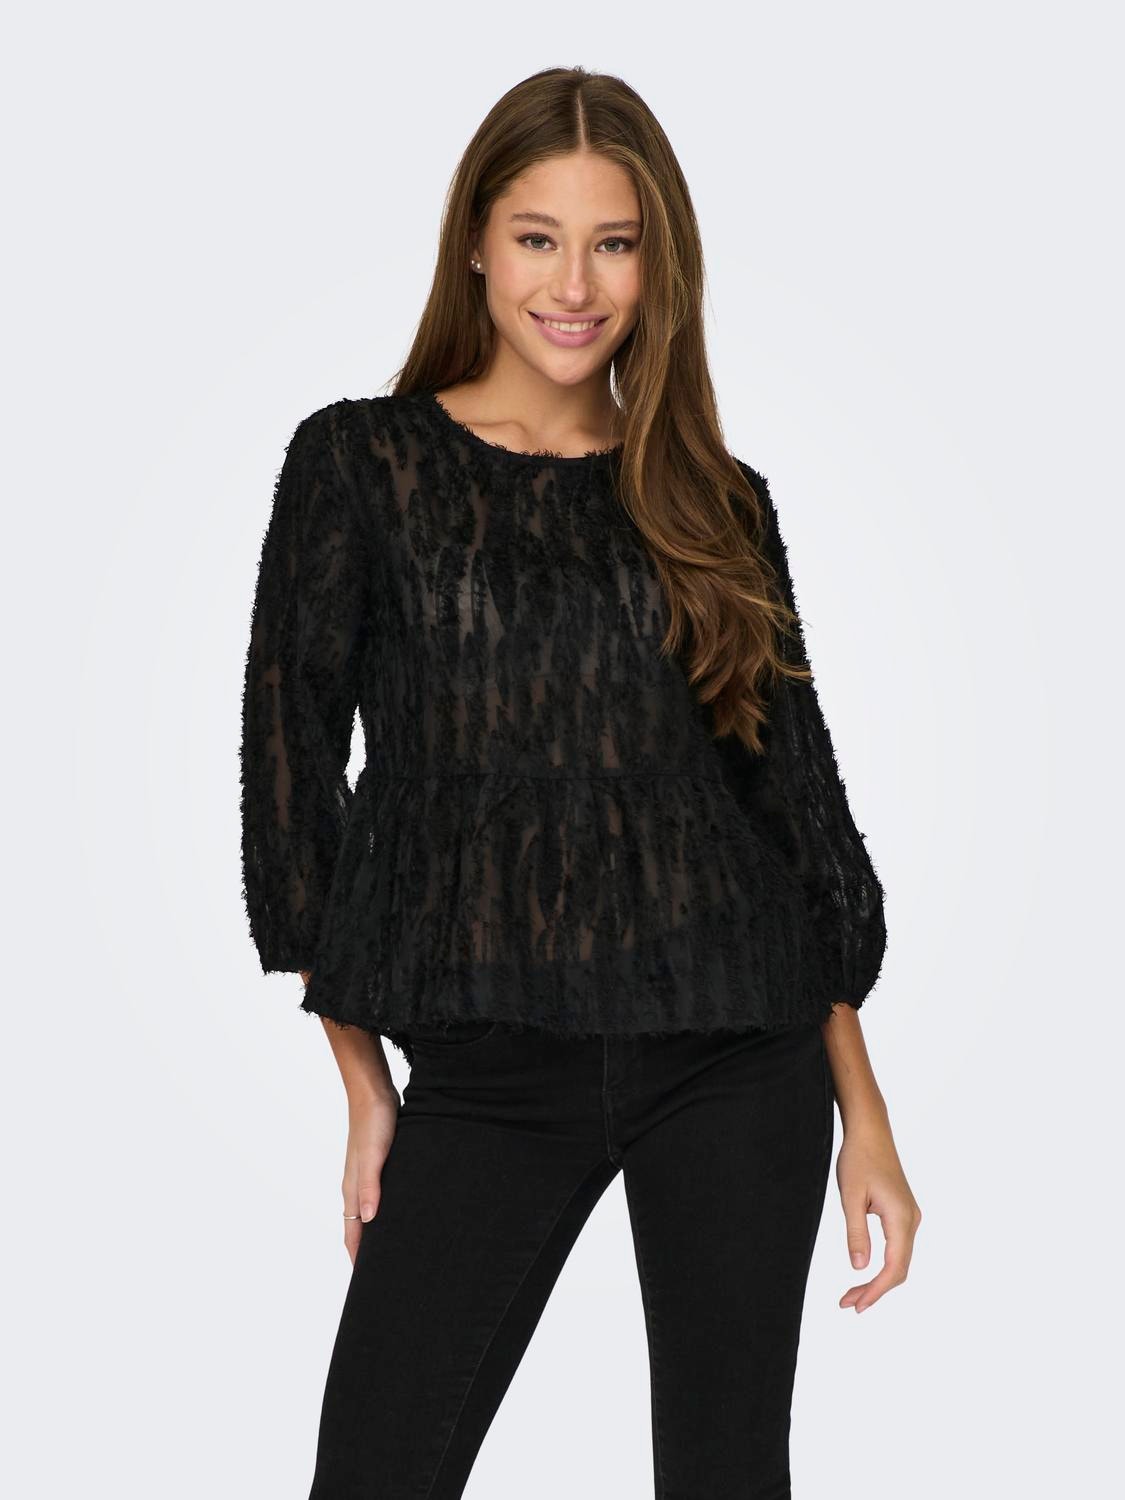 ONLY Textured top -Black - 15281522